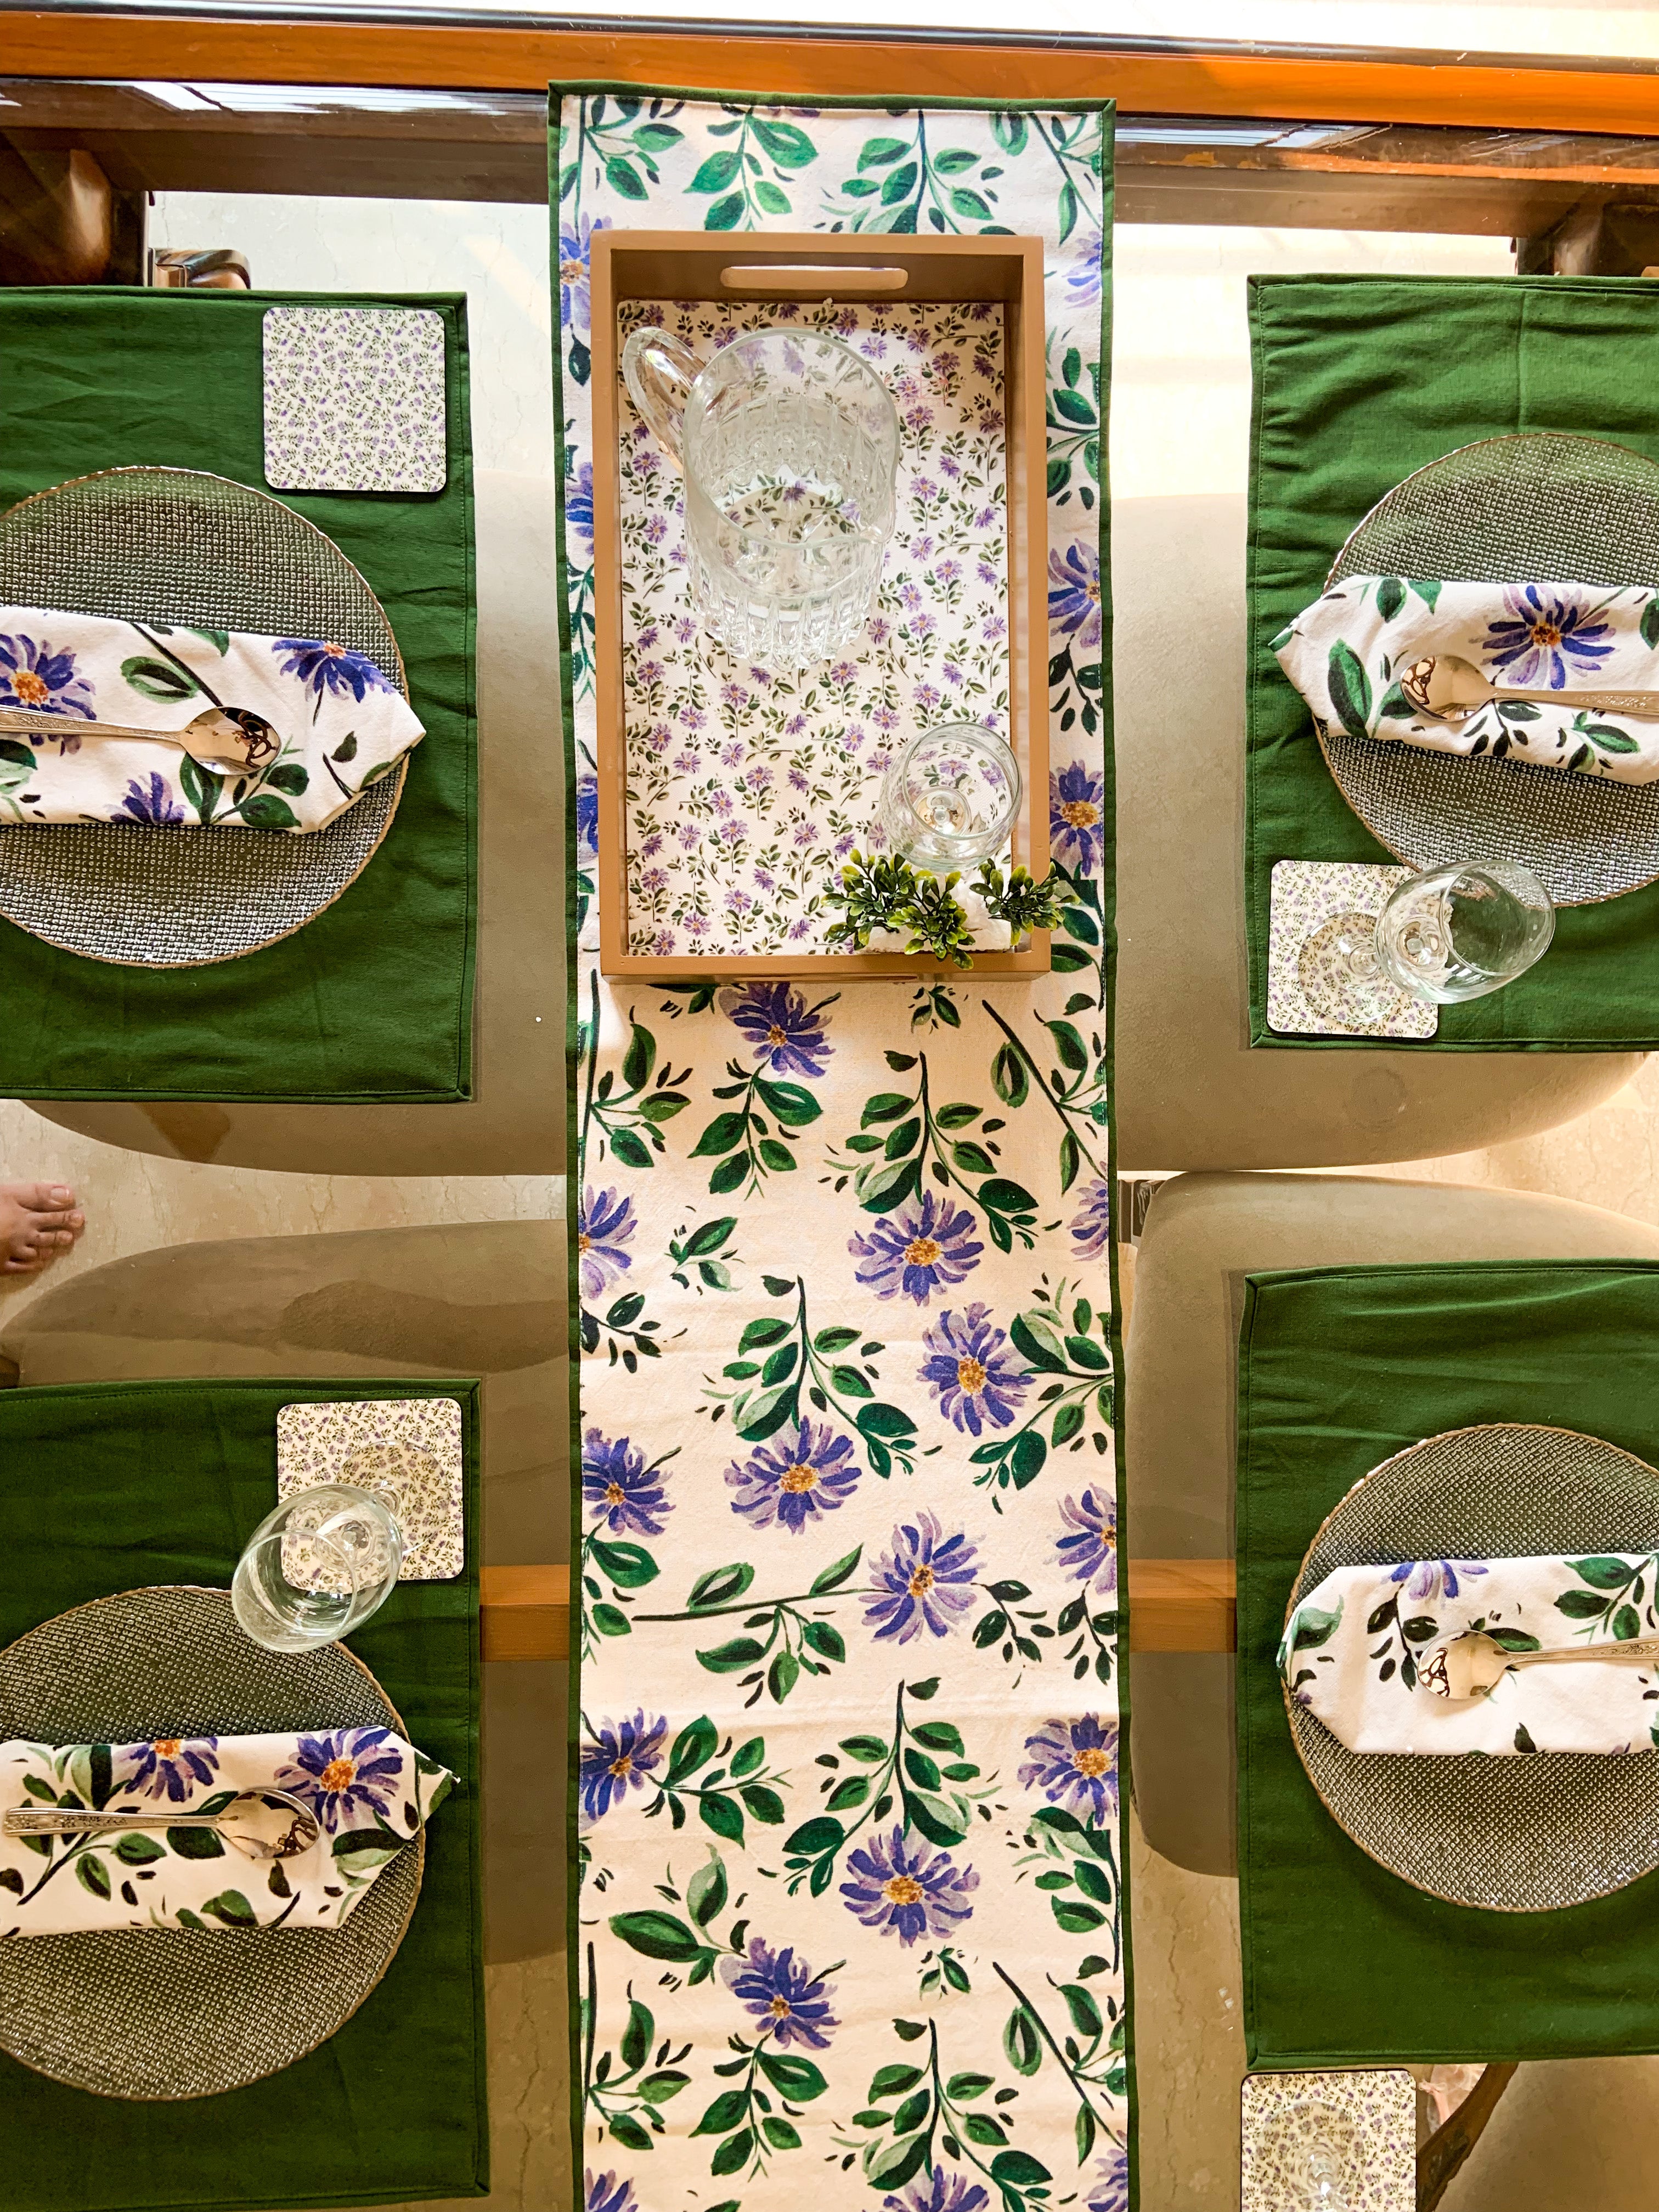 Full table Set: Green Floral